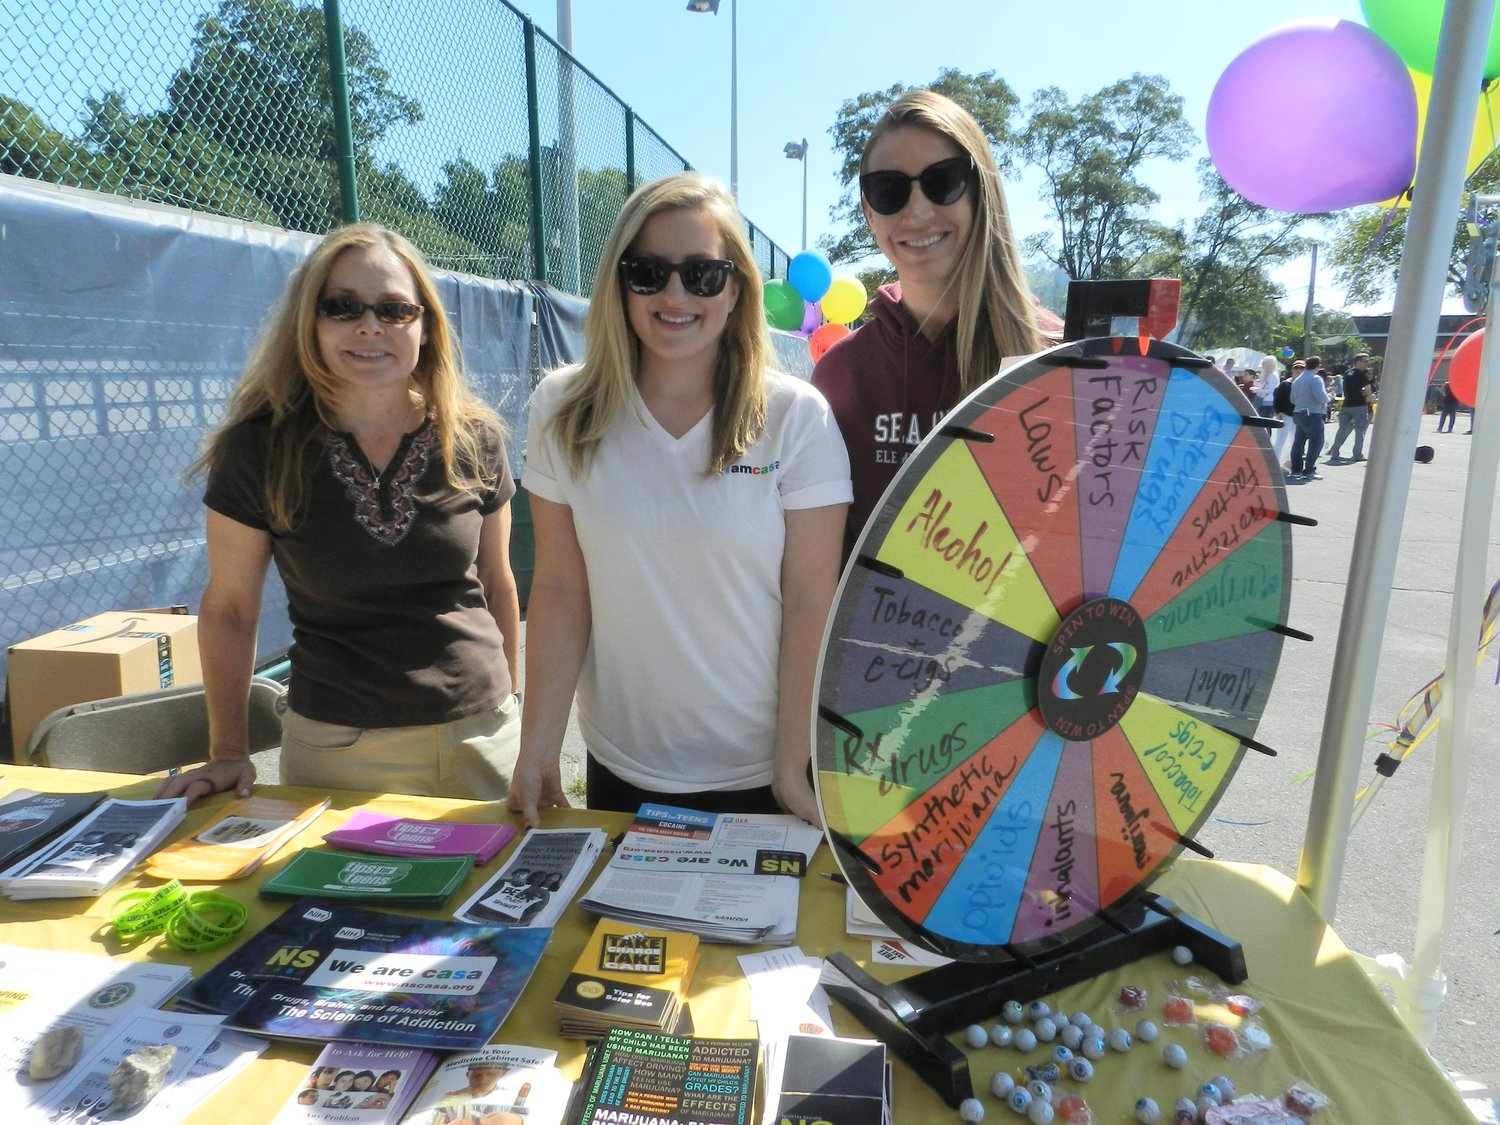 North Shore School District’s social workers, Rachel McAree, left, Reisa Berga and Kaitlin Harvey, provided the community with information about substance abuse education and prevention.